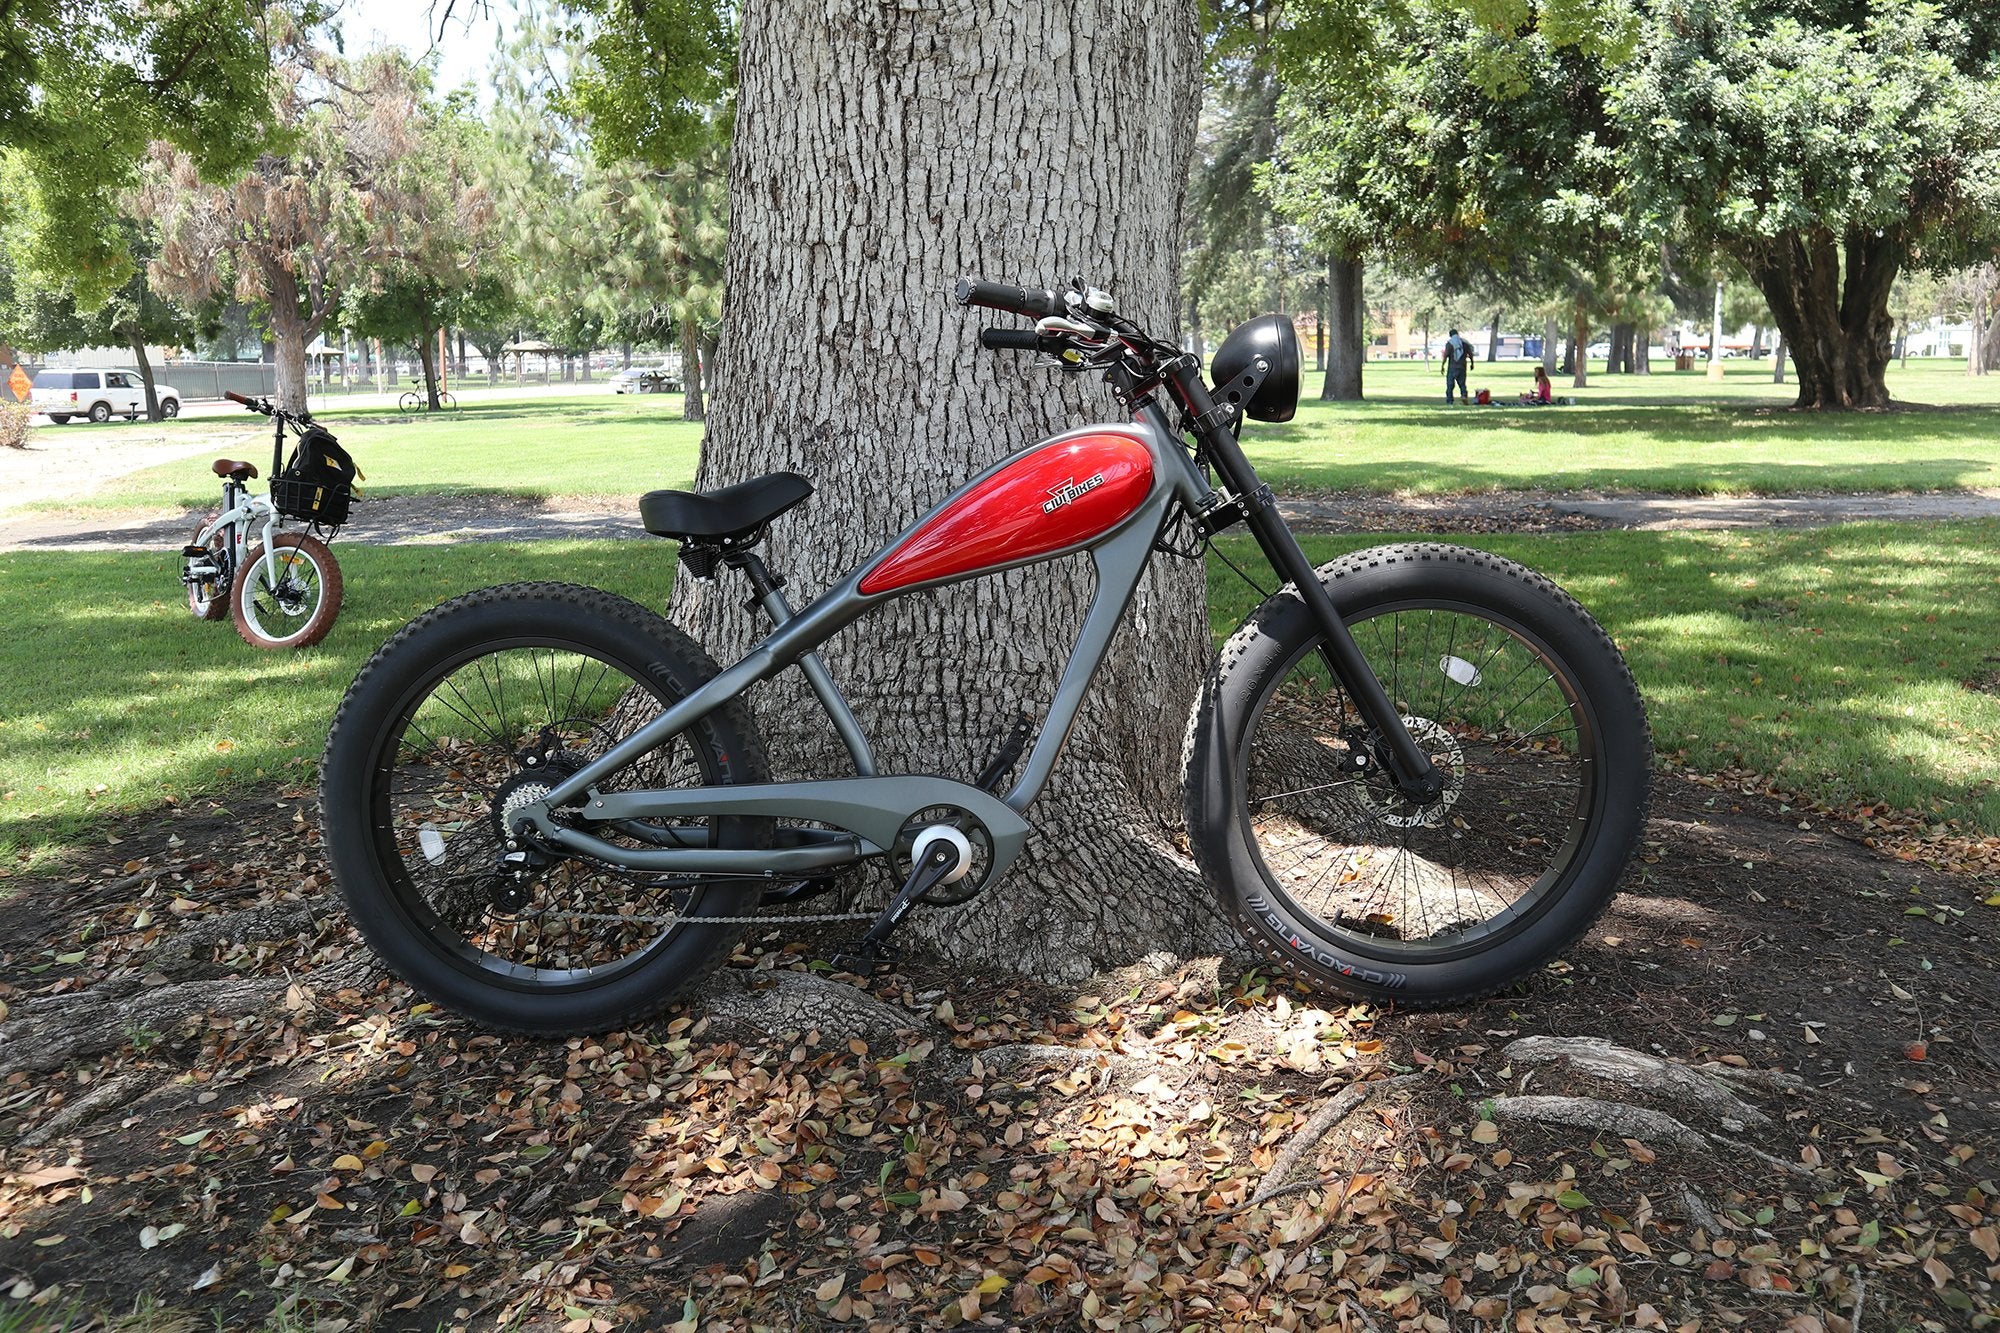 REVI BIKES CHEETAH PLUS - THE CAFE RACER Electric Bicycle